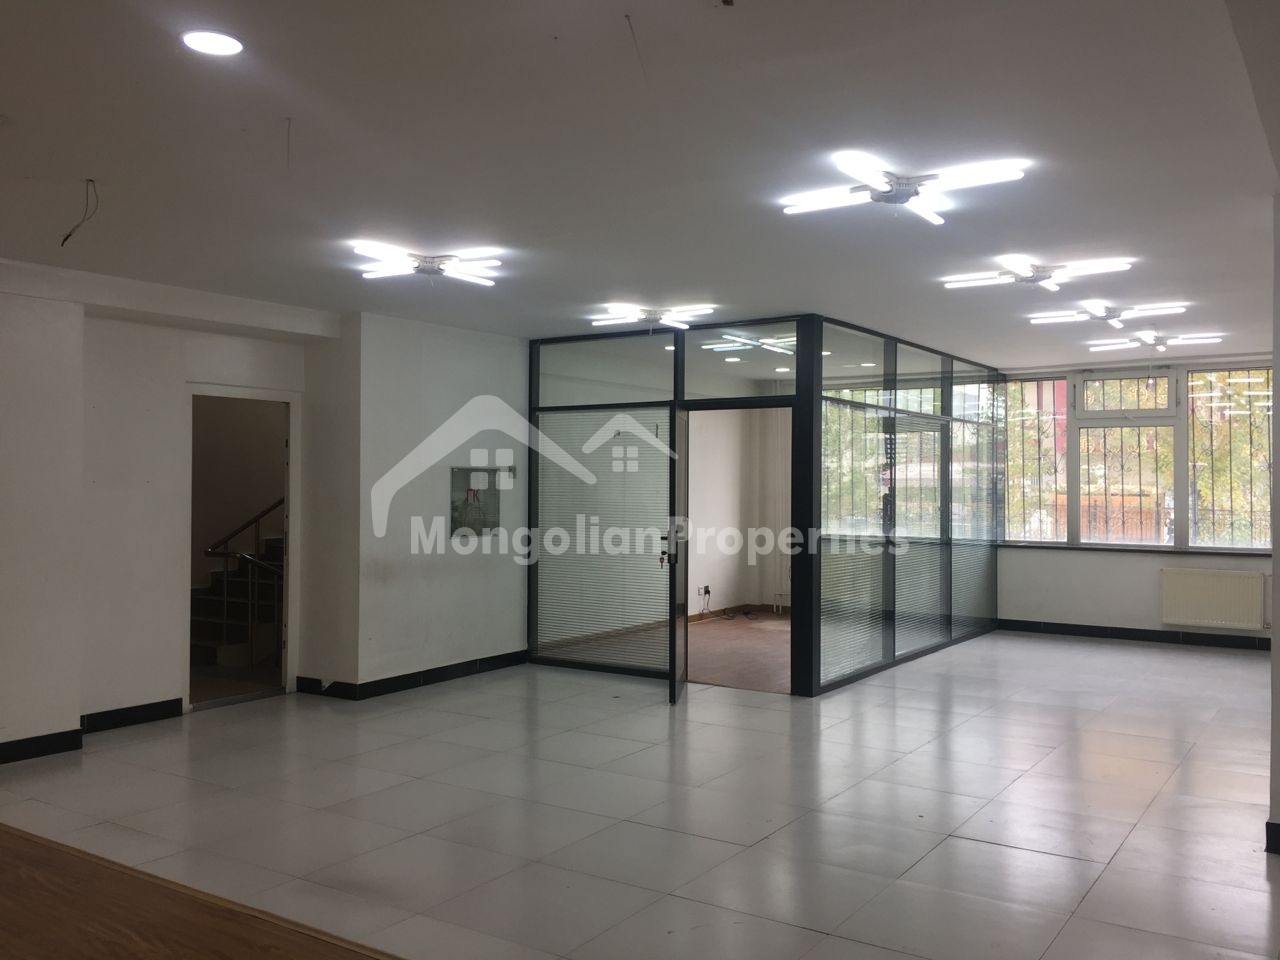 Spacious Parking, 680m2, 2 stoery office building is for rent just behind Tengis Cinema